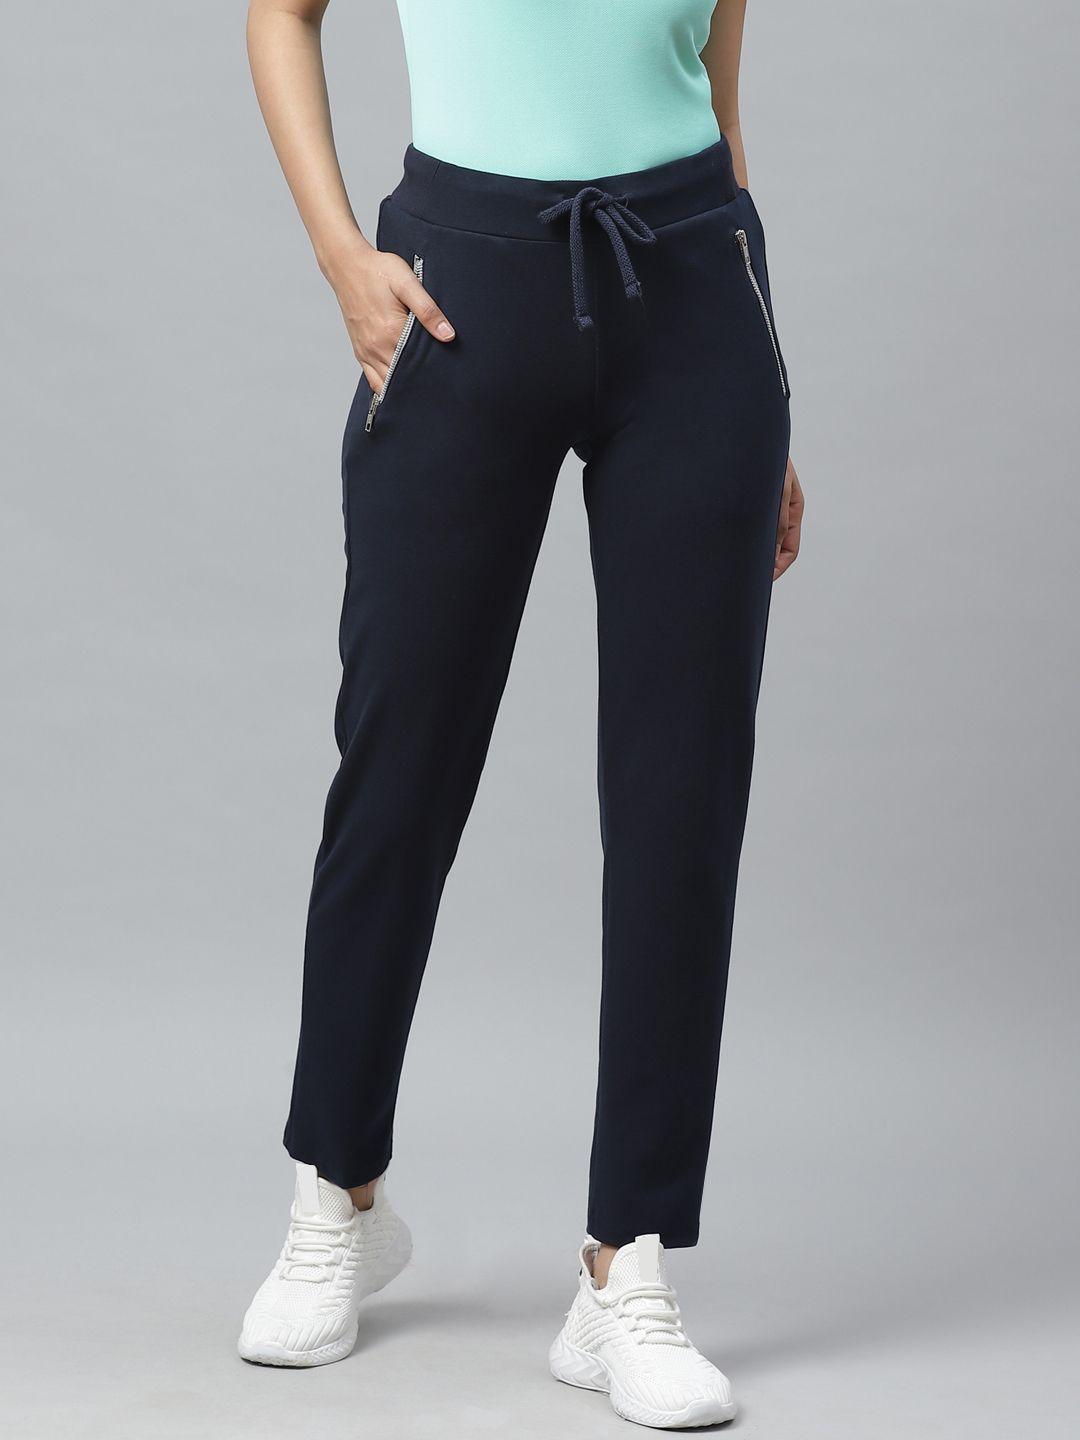 cayman-women-navy-blue-solid-track-pants